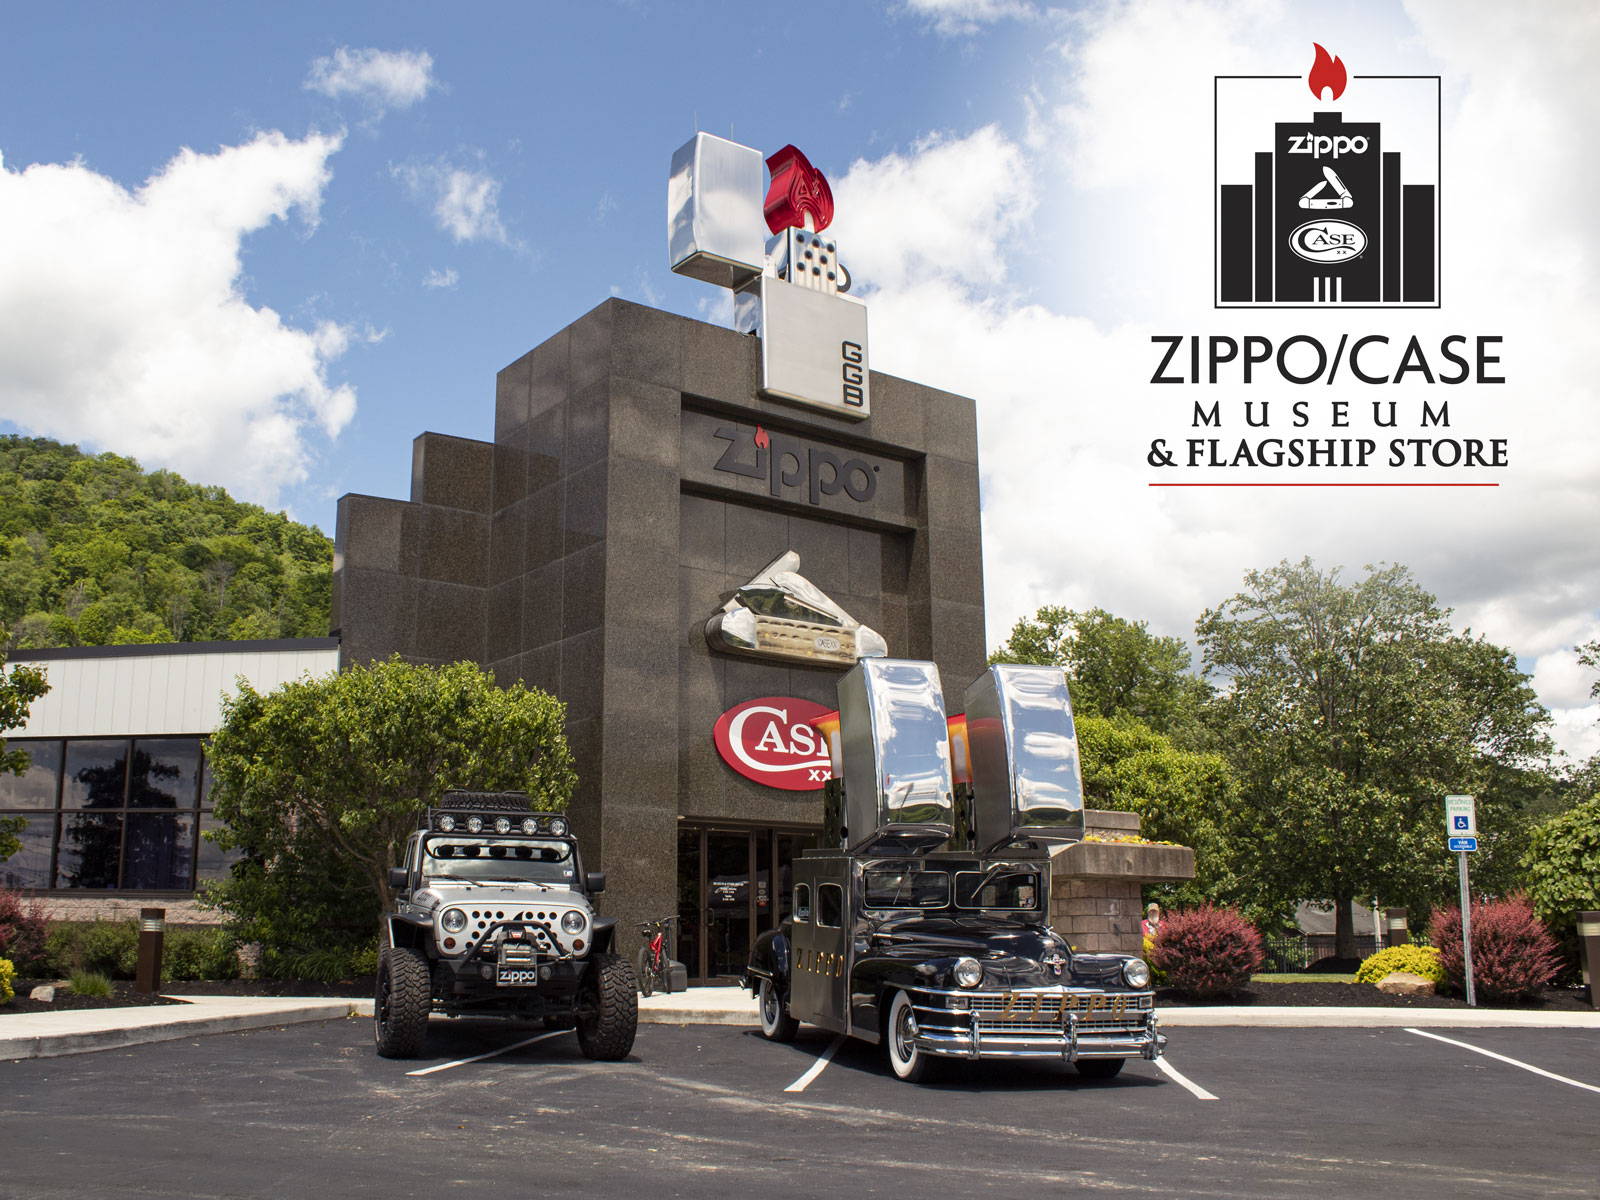 Zippo/Case Museum entrance with the Case Jeep and Zippo Car.